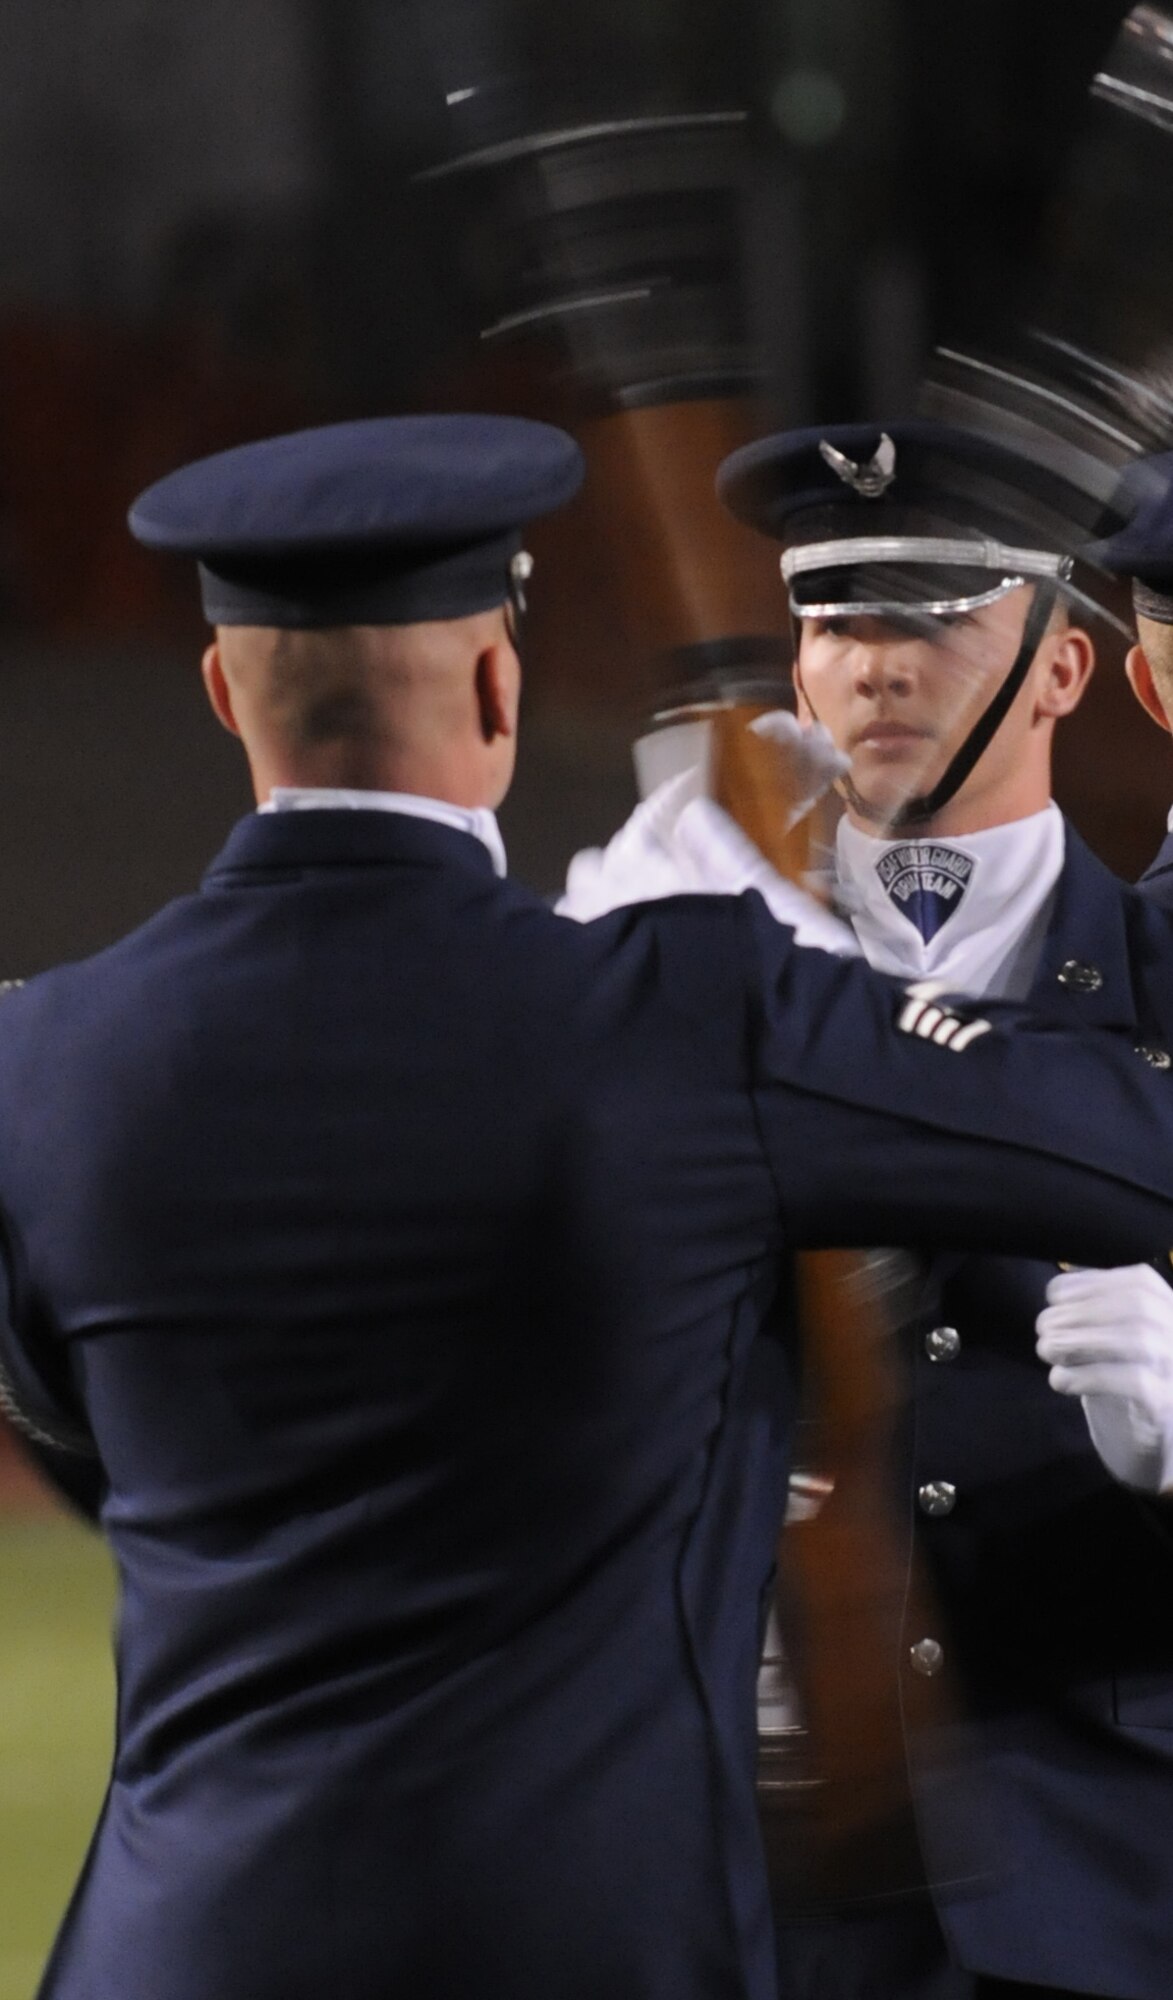 Staff Sgt. Kelly Webster of the United States Air Force Honor Guard Drill Team performs at halftime at an Angelo State University football game Oct. 31 in San Angelo, Texas. The Drill Team tours worldwide representing all Airmen while showcasing Air Force precision and professionalism and personifying the integrity, discipline, and teamwork of every Airman and every Air Force mission. During the Air Force Honor Guard's 60-year history, their traveling component, the Drill Team, has performed in every state of the union and many countries abroad. (U.S. Air Force photo by Senior Air man Sean Adams) 